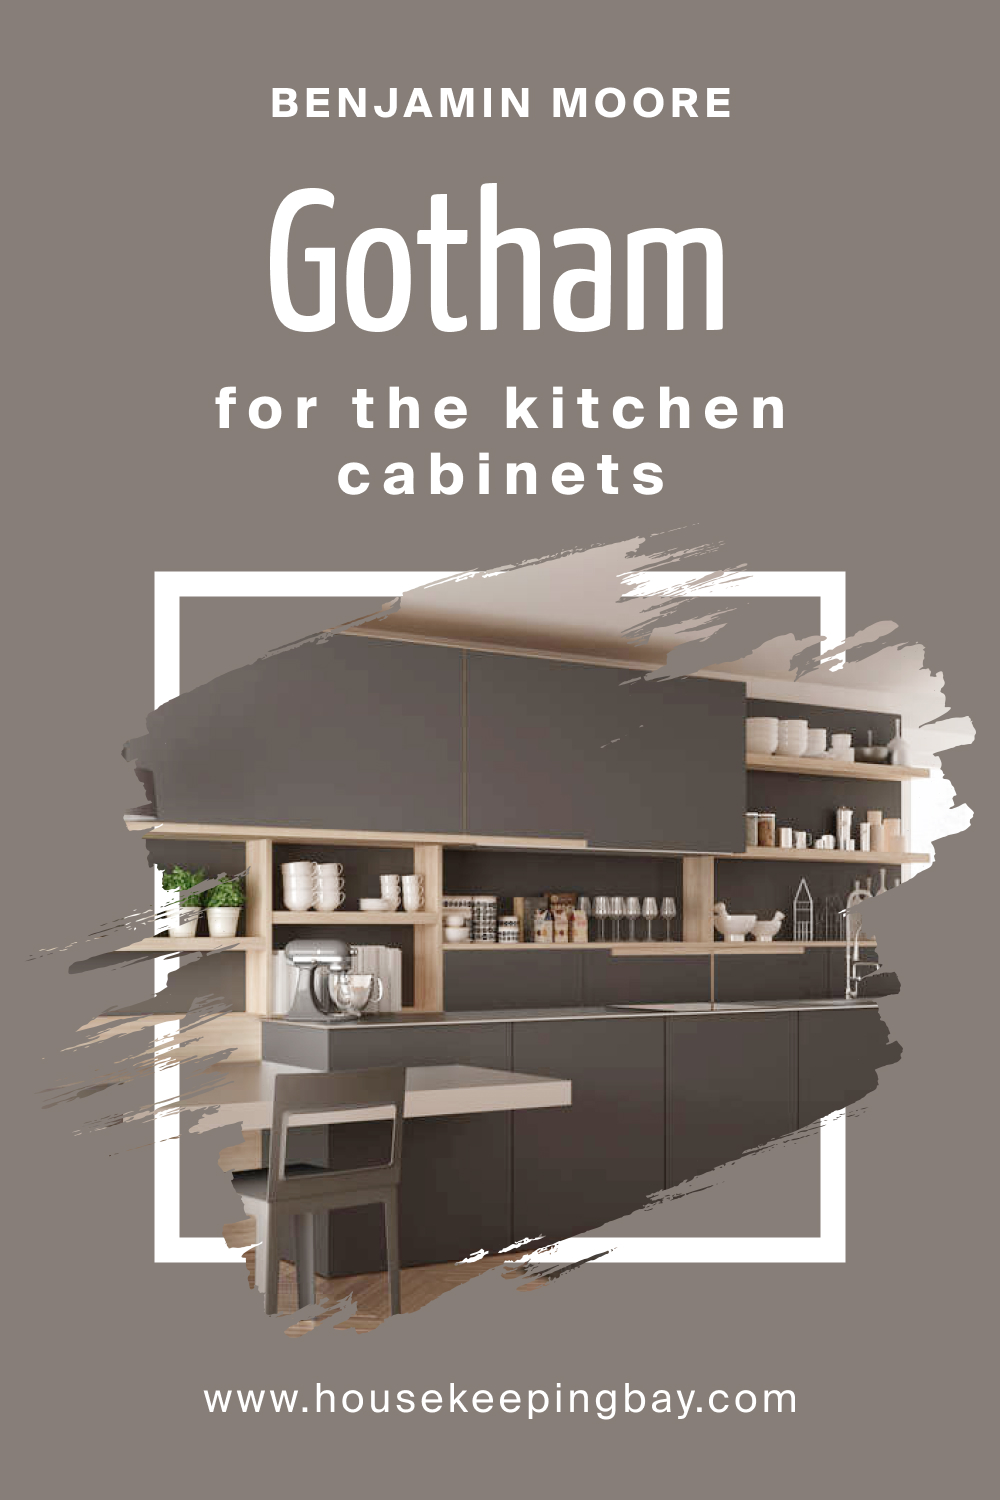 How to Use Gotham CSP-385 on the Kitchen Cabinets?